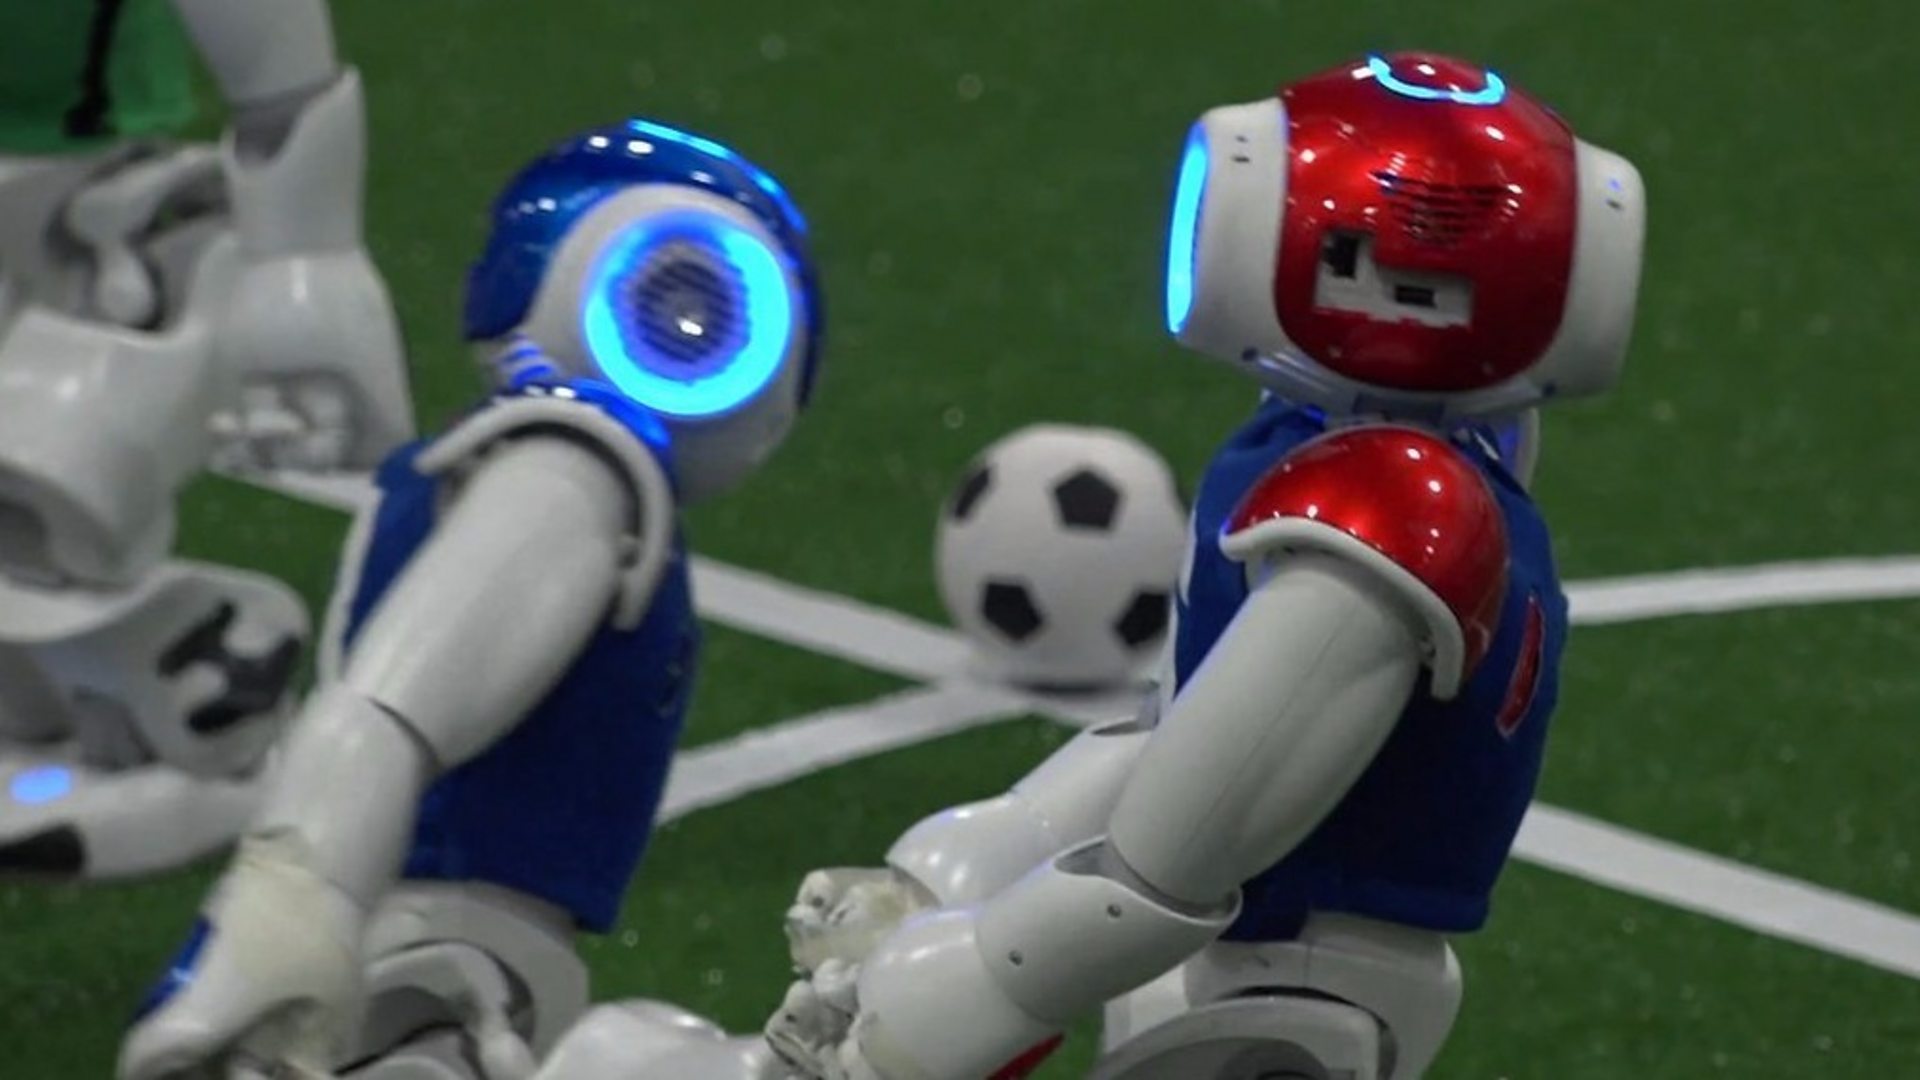 Are robots getting better at BBC News